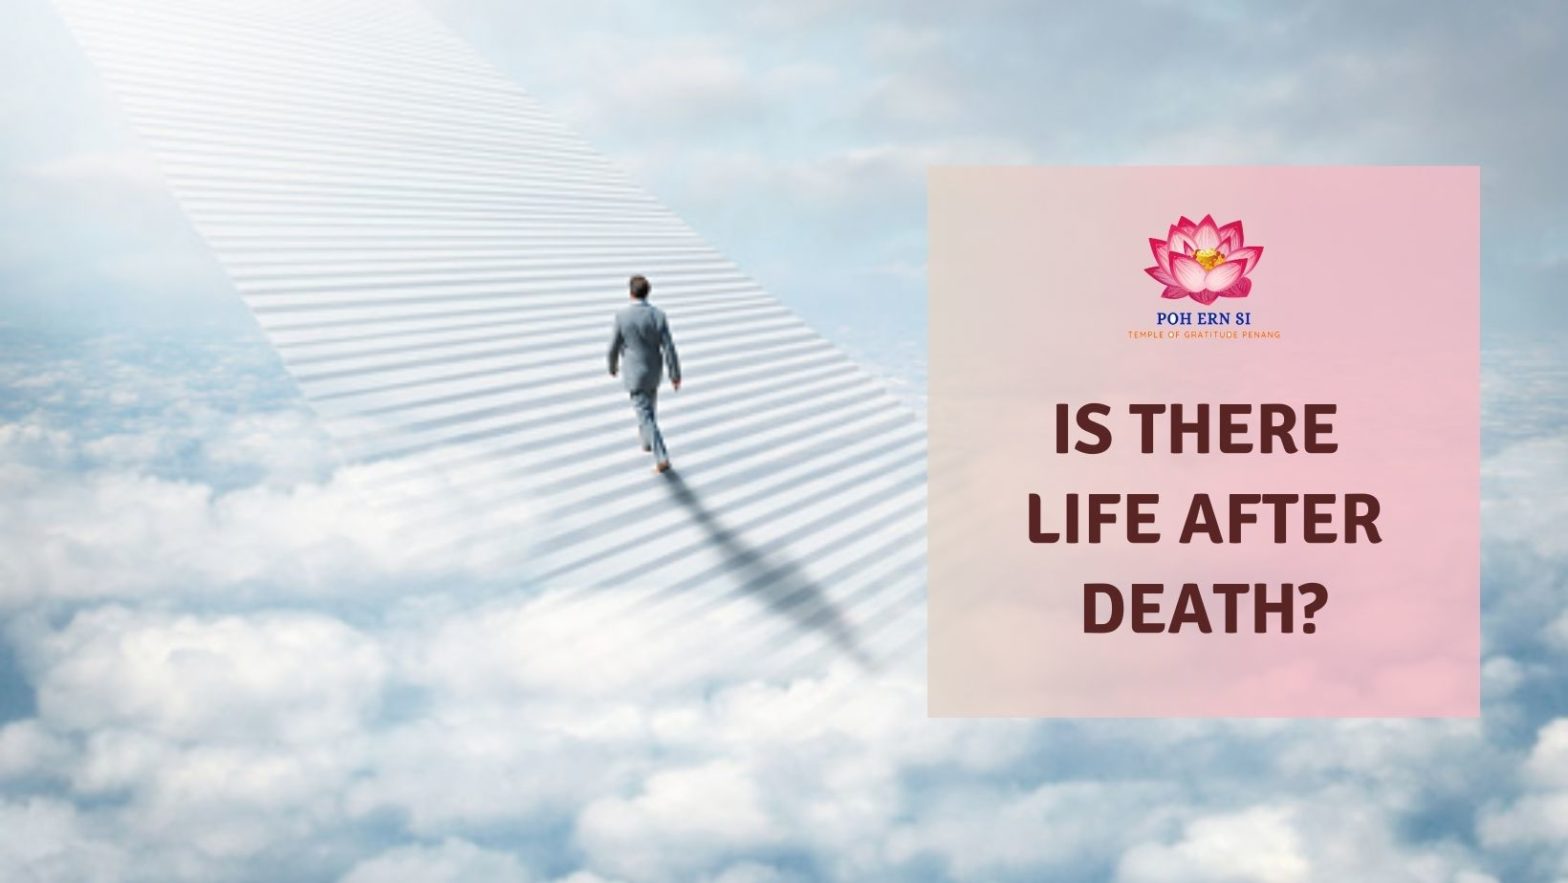 is there life after death featured image - Pohernsi's Blog